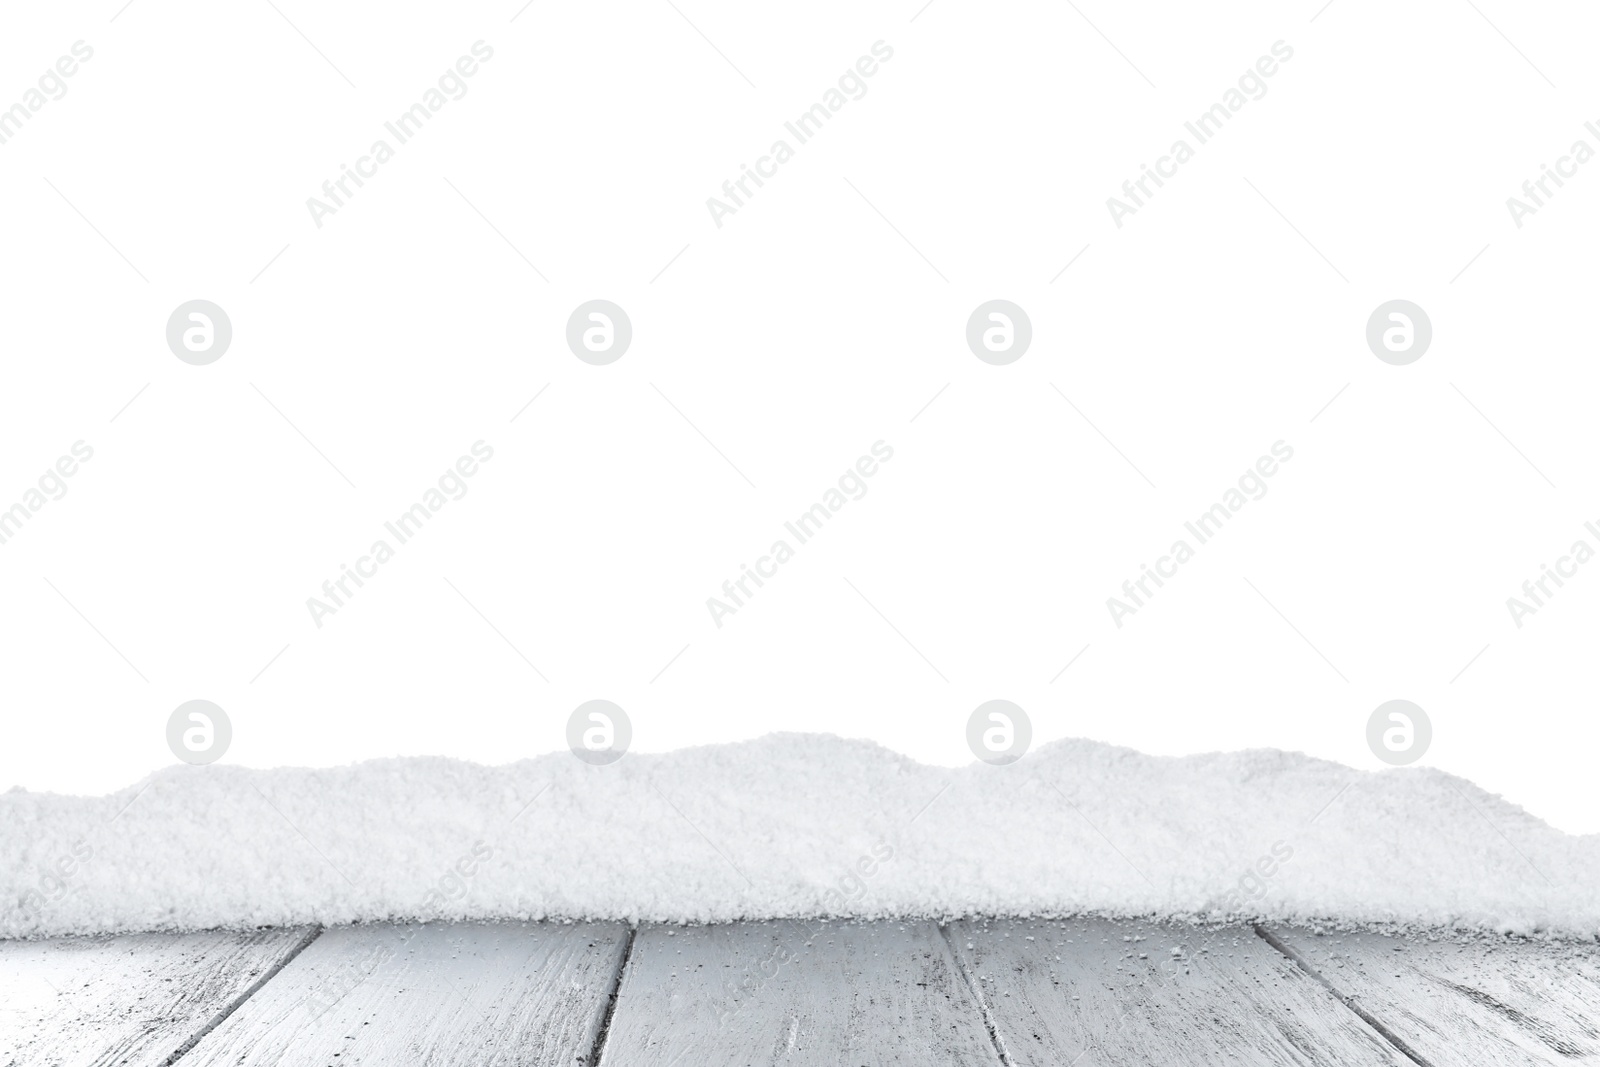 Photo of Heap of snow on grey wooden surface against white background